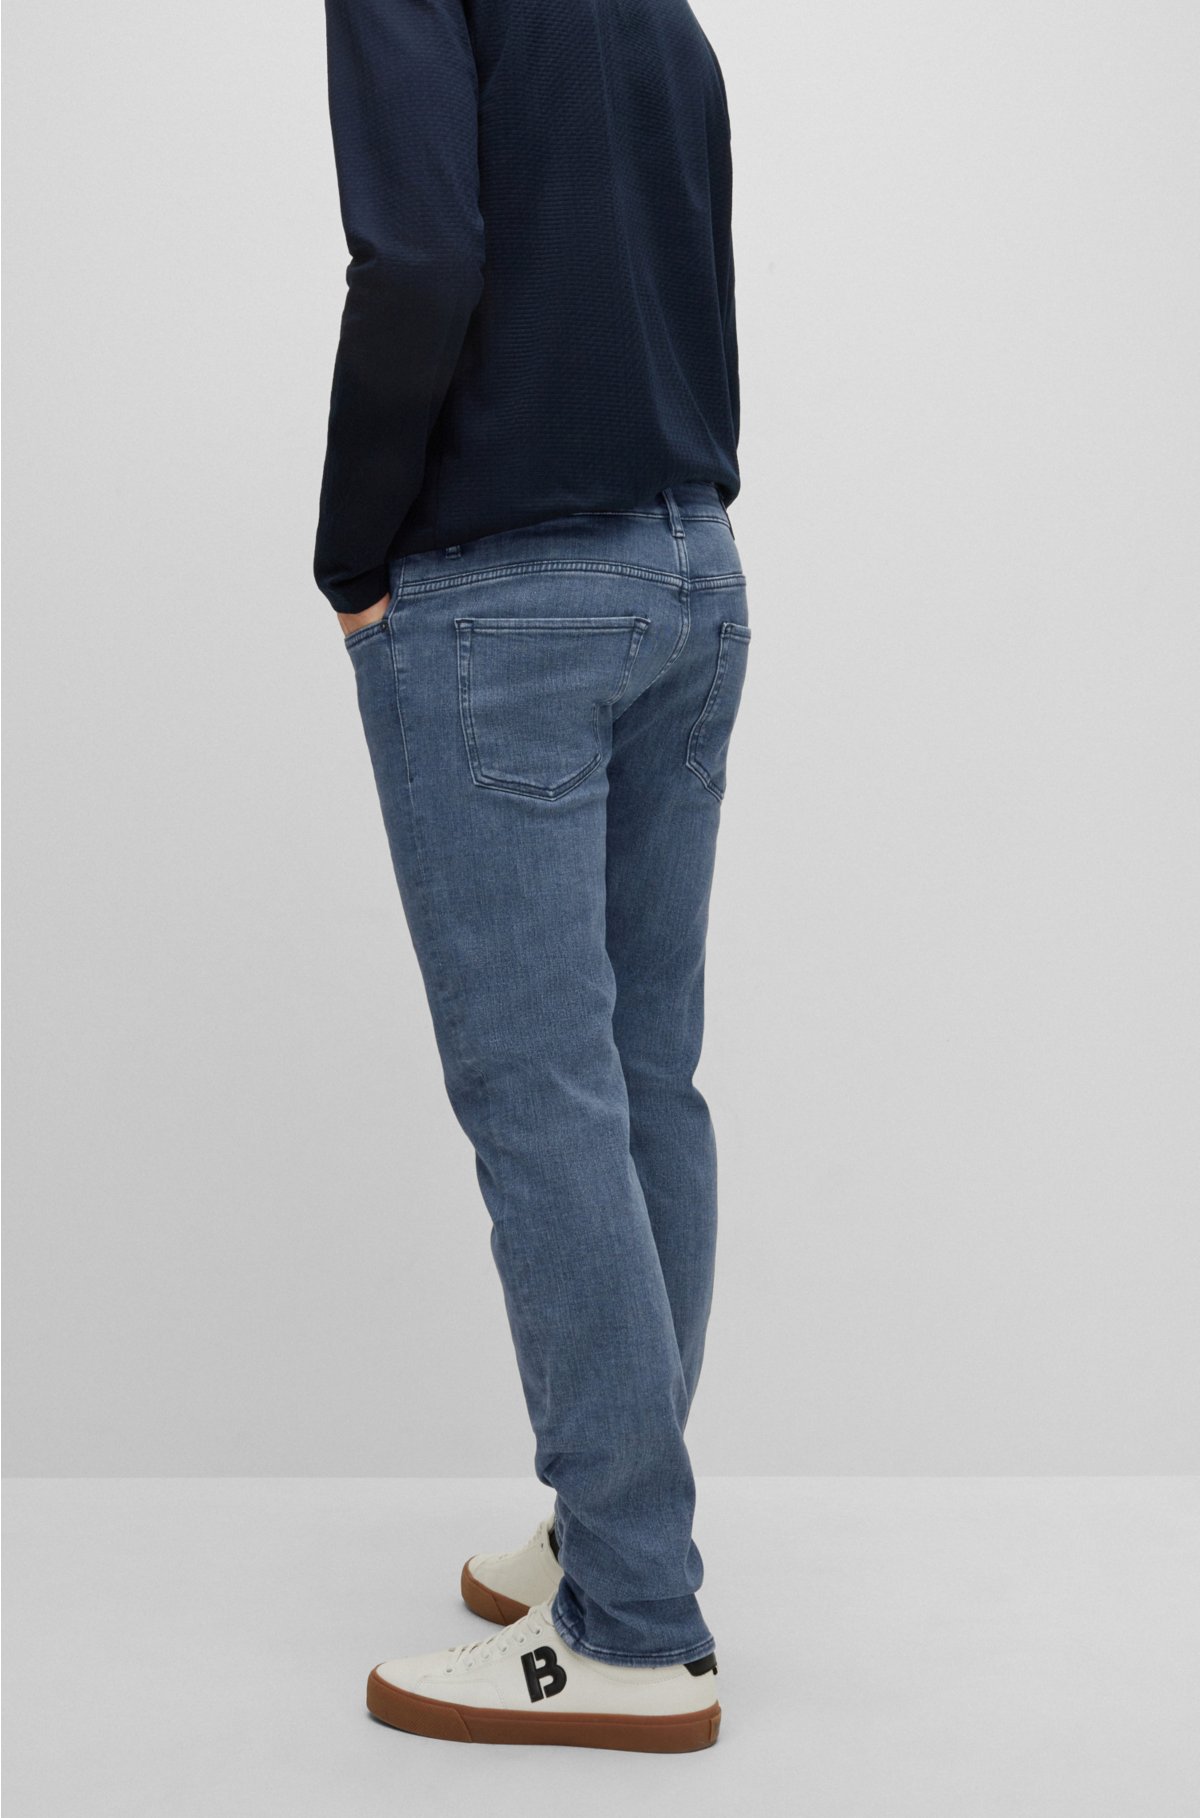 in - Slim-fit denim gray jeans BOSS Italian cashmere-touch